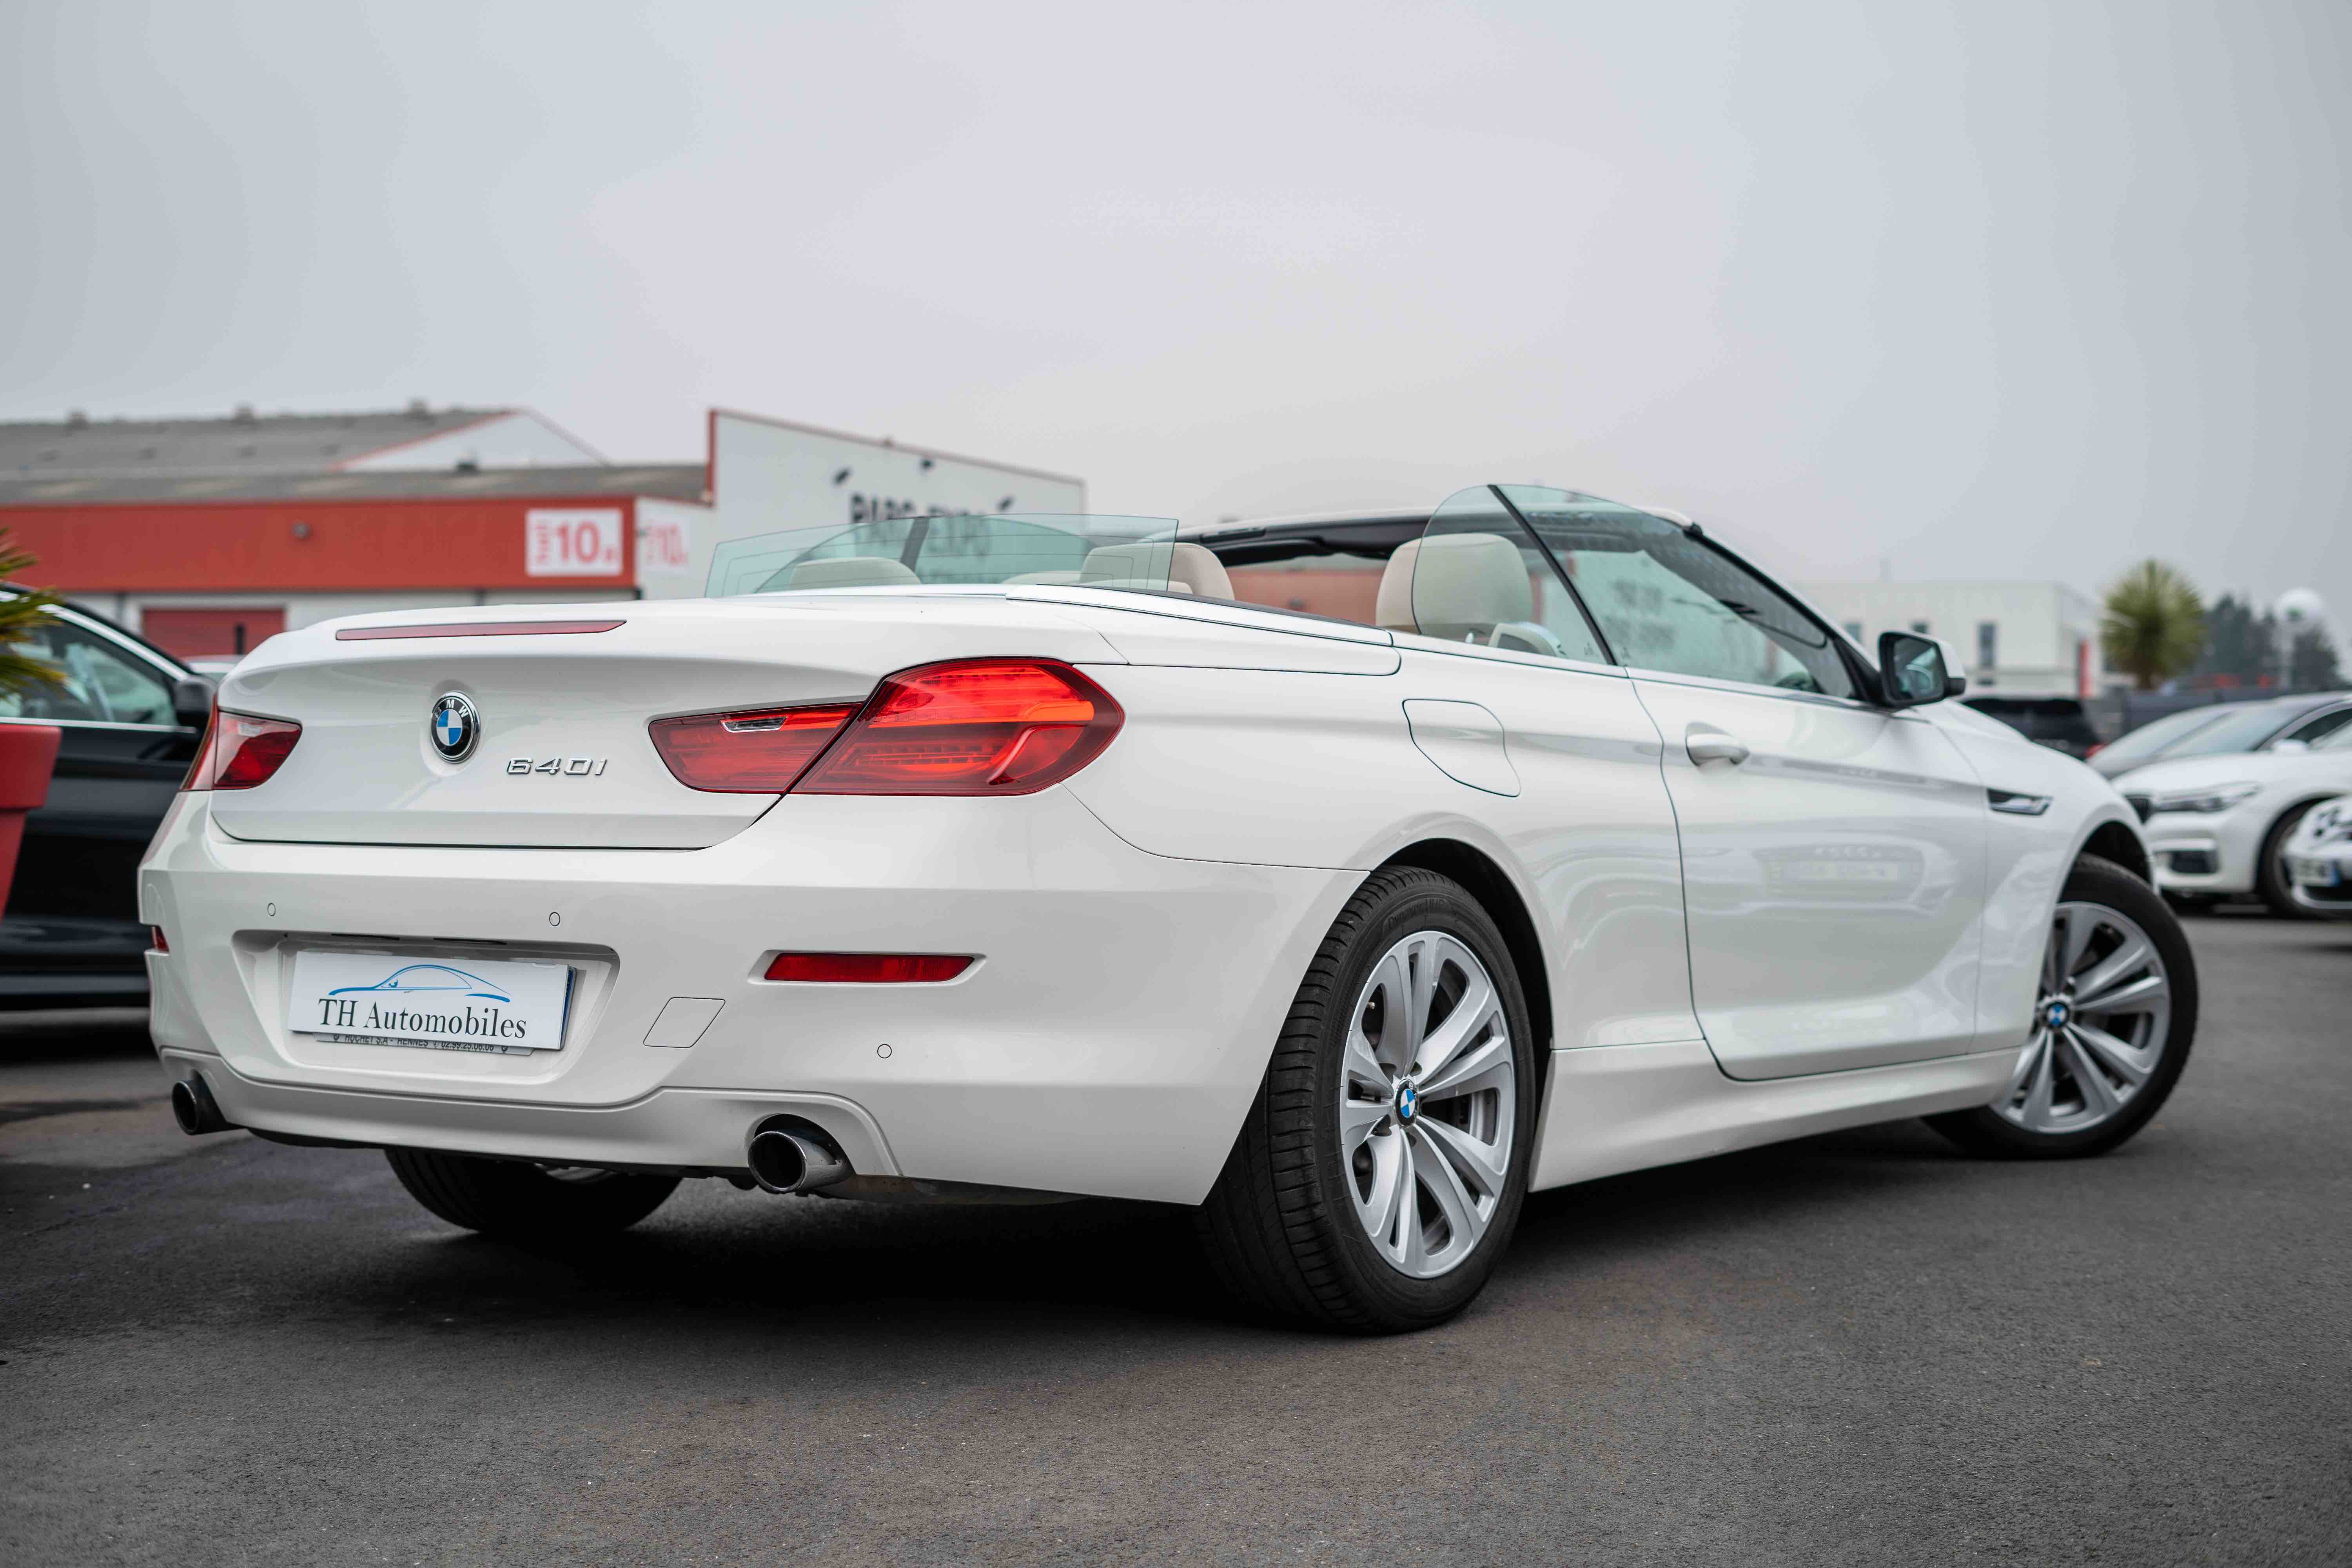 BMW SERIE 6 (F12) CABRIOLET 640I 320 LUXE BVA8